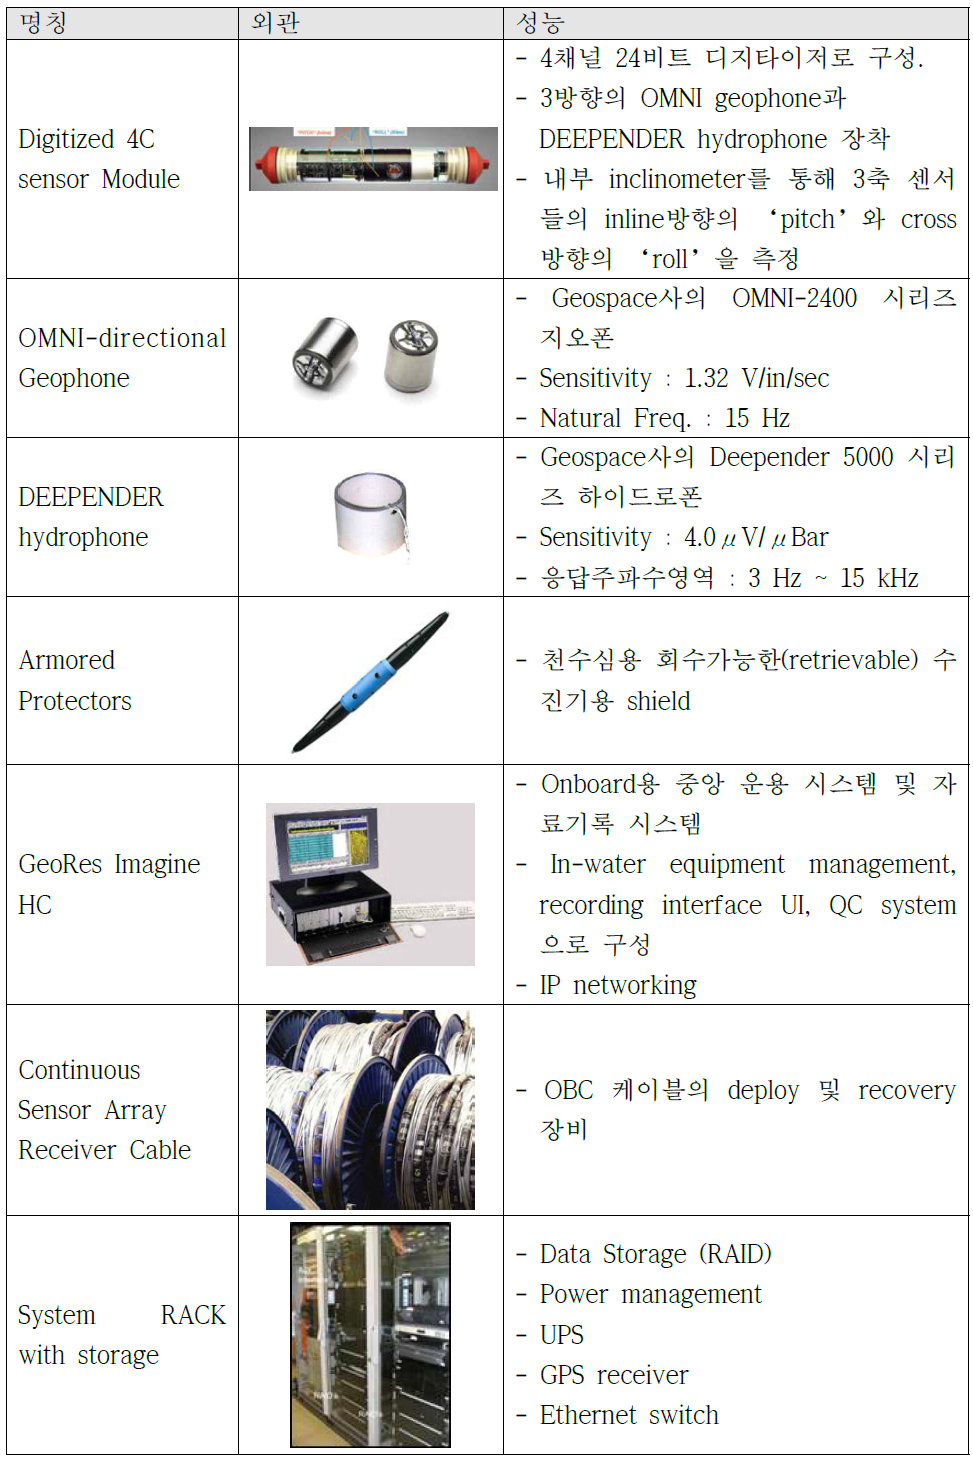 Specifications of key modules of OBC system.